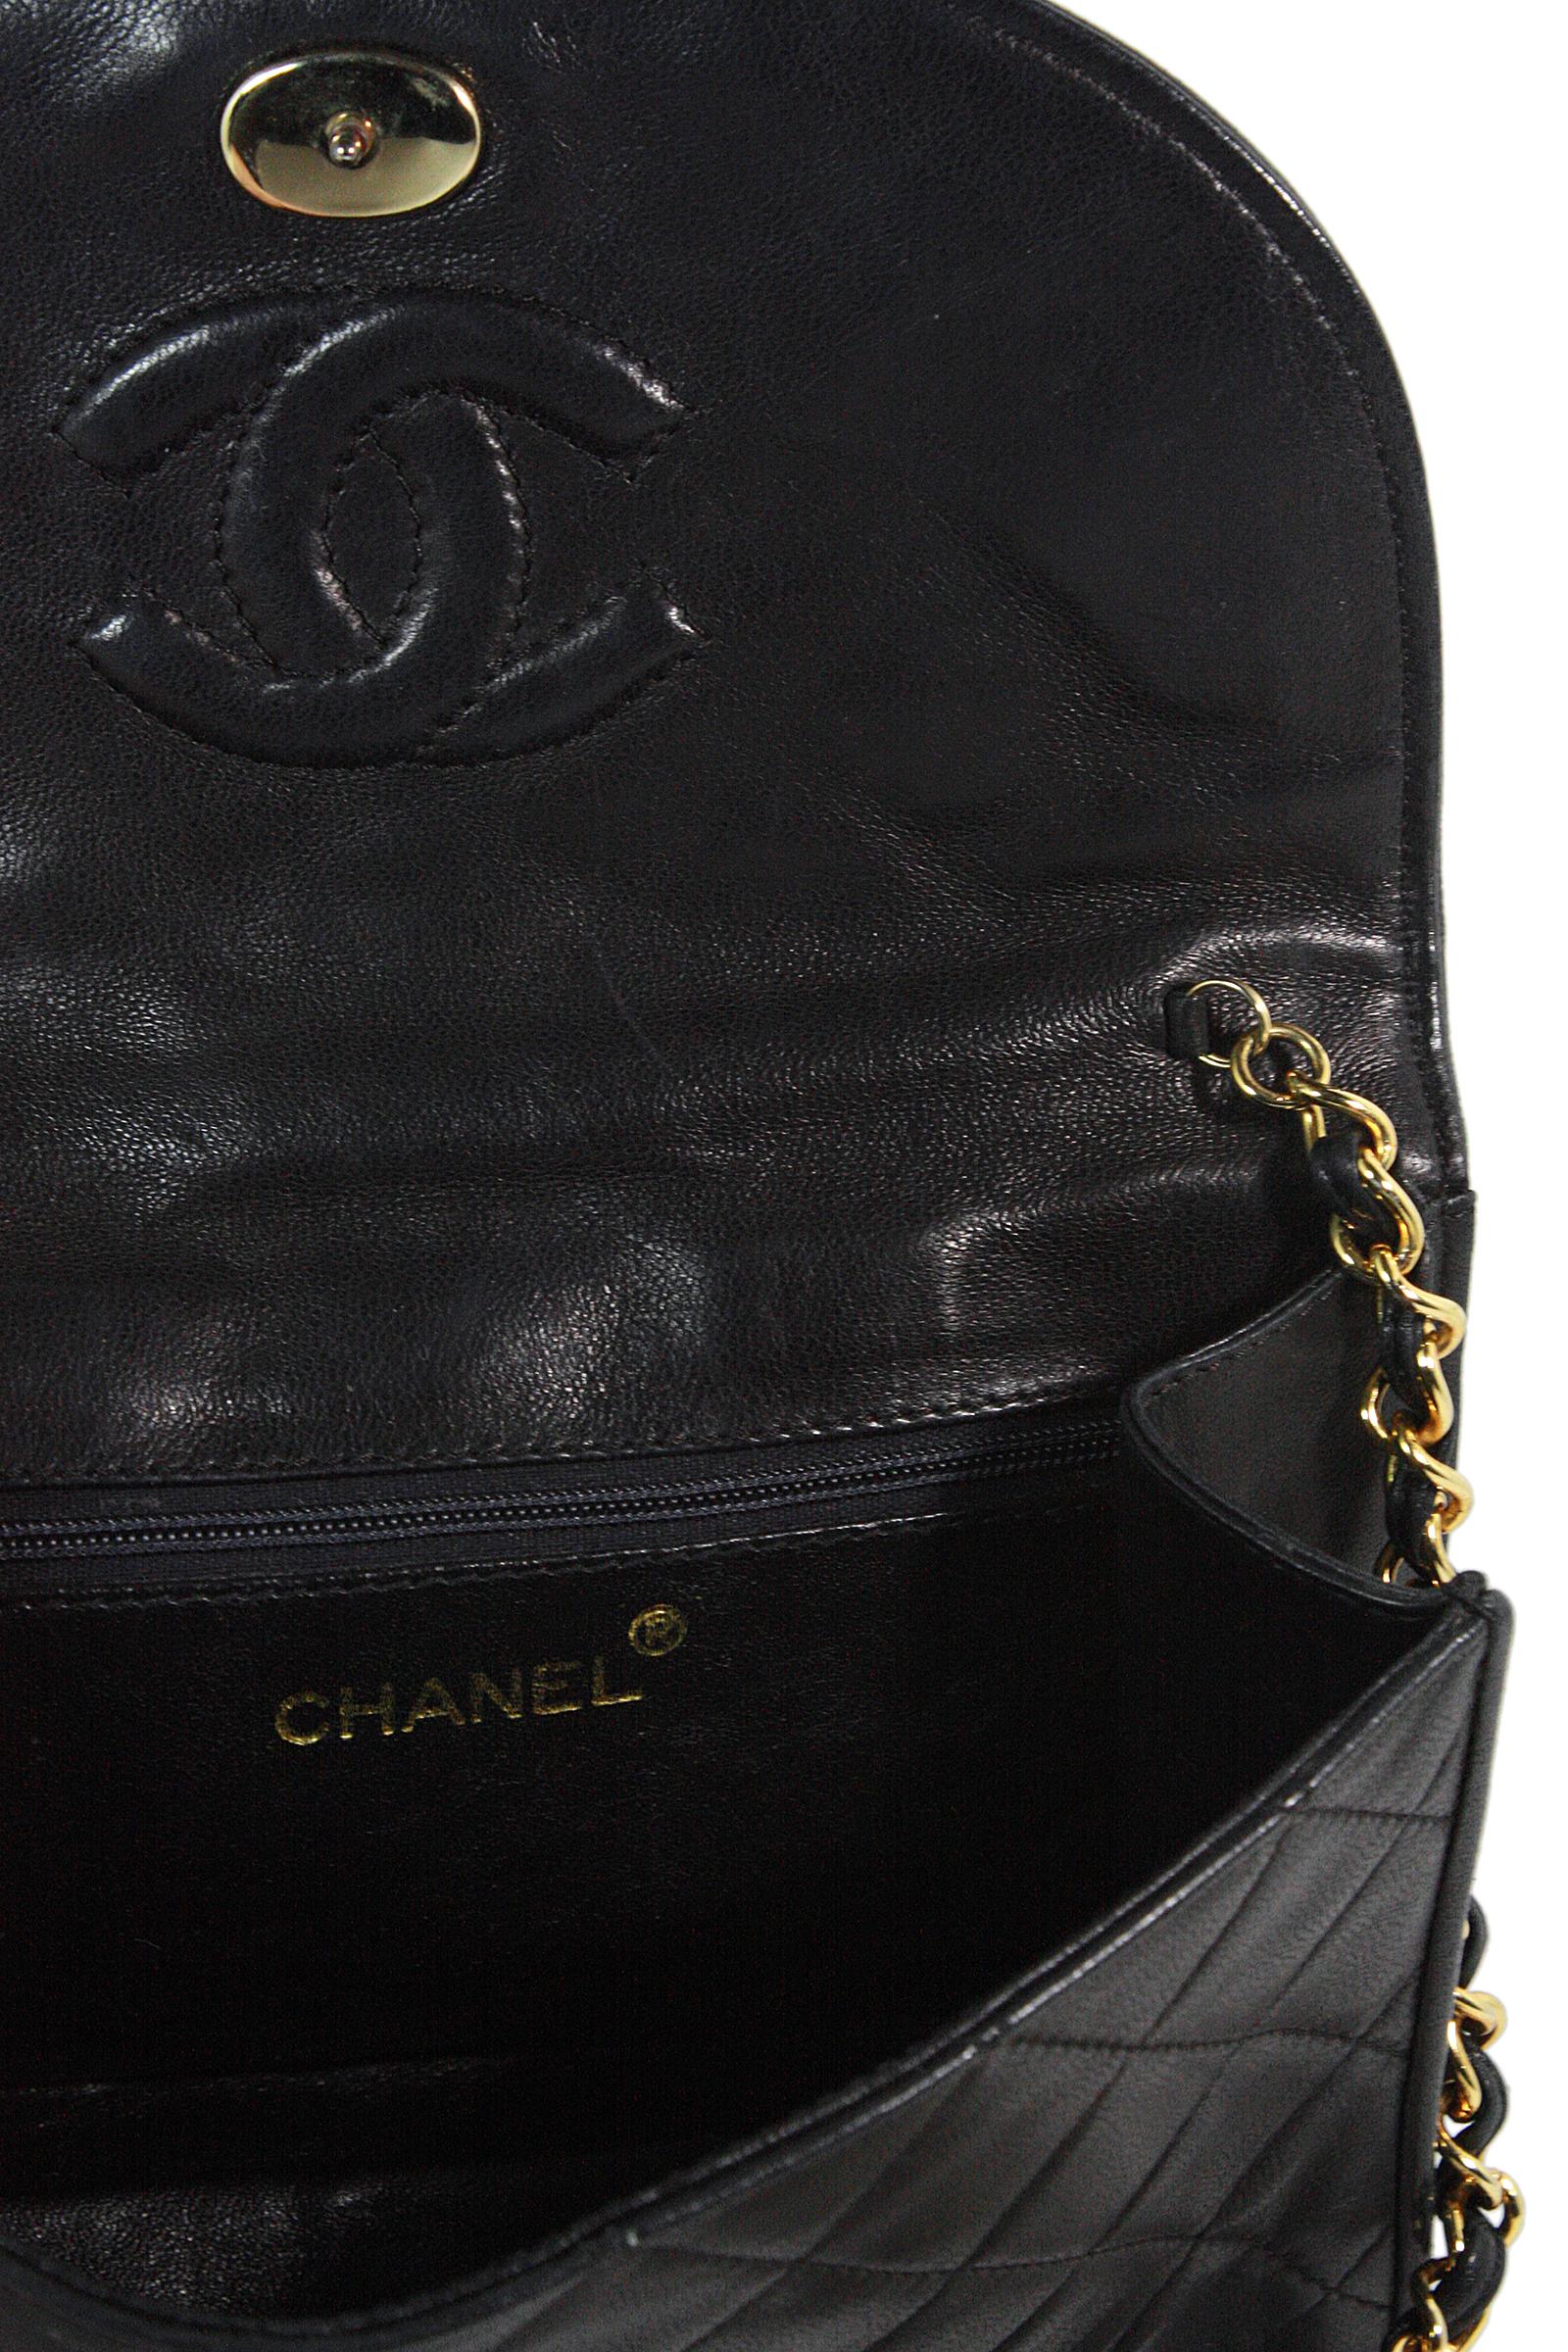 Women's Chanel Black Leather Quilted Crossbody Bag with Tassle For Sale